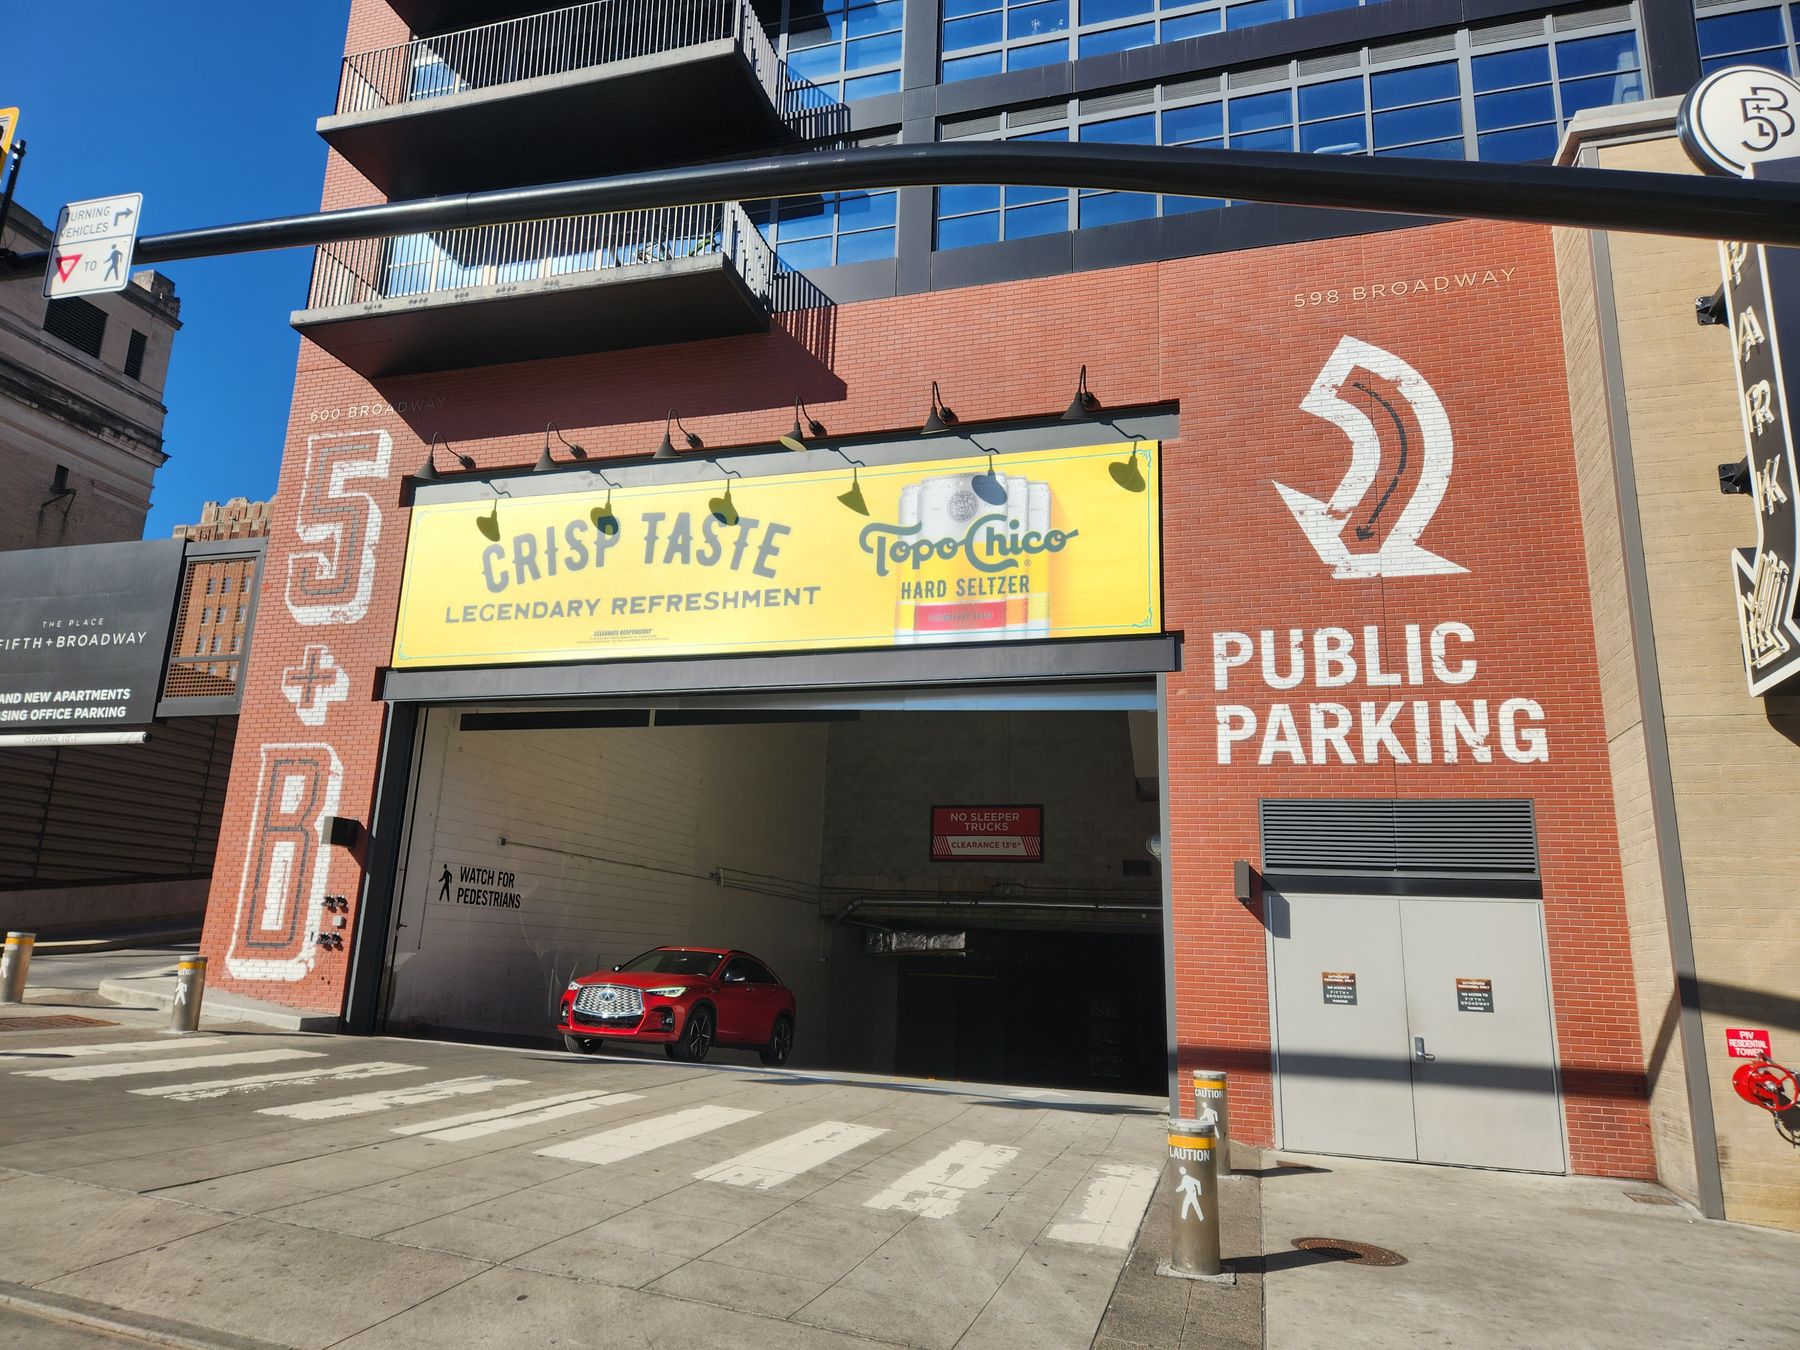 Parking Garages and Fees Information